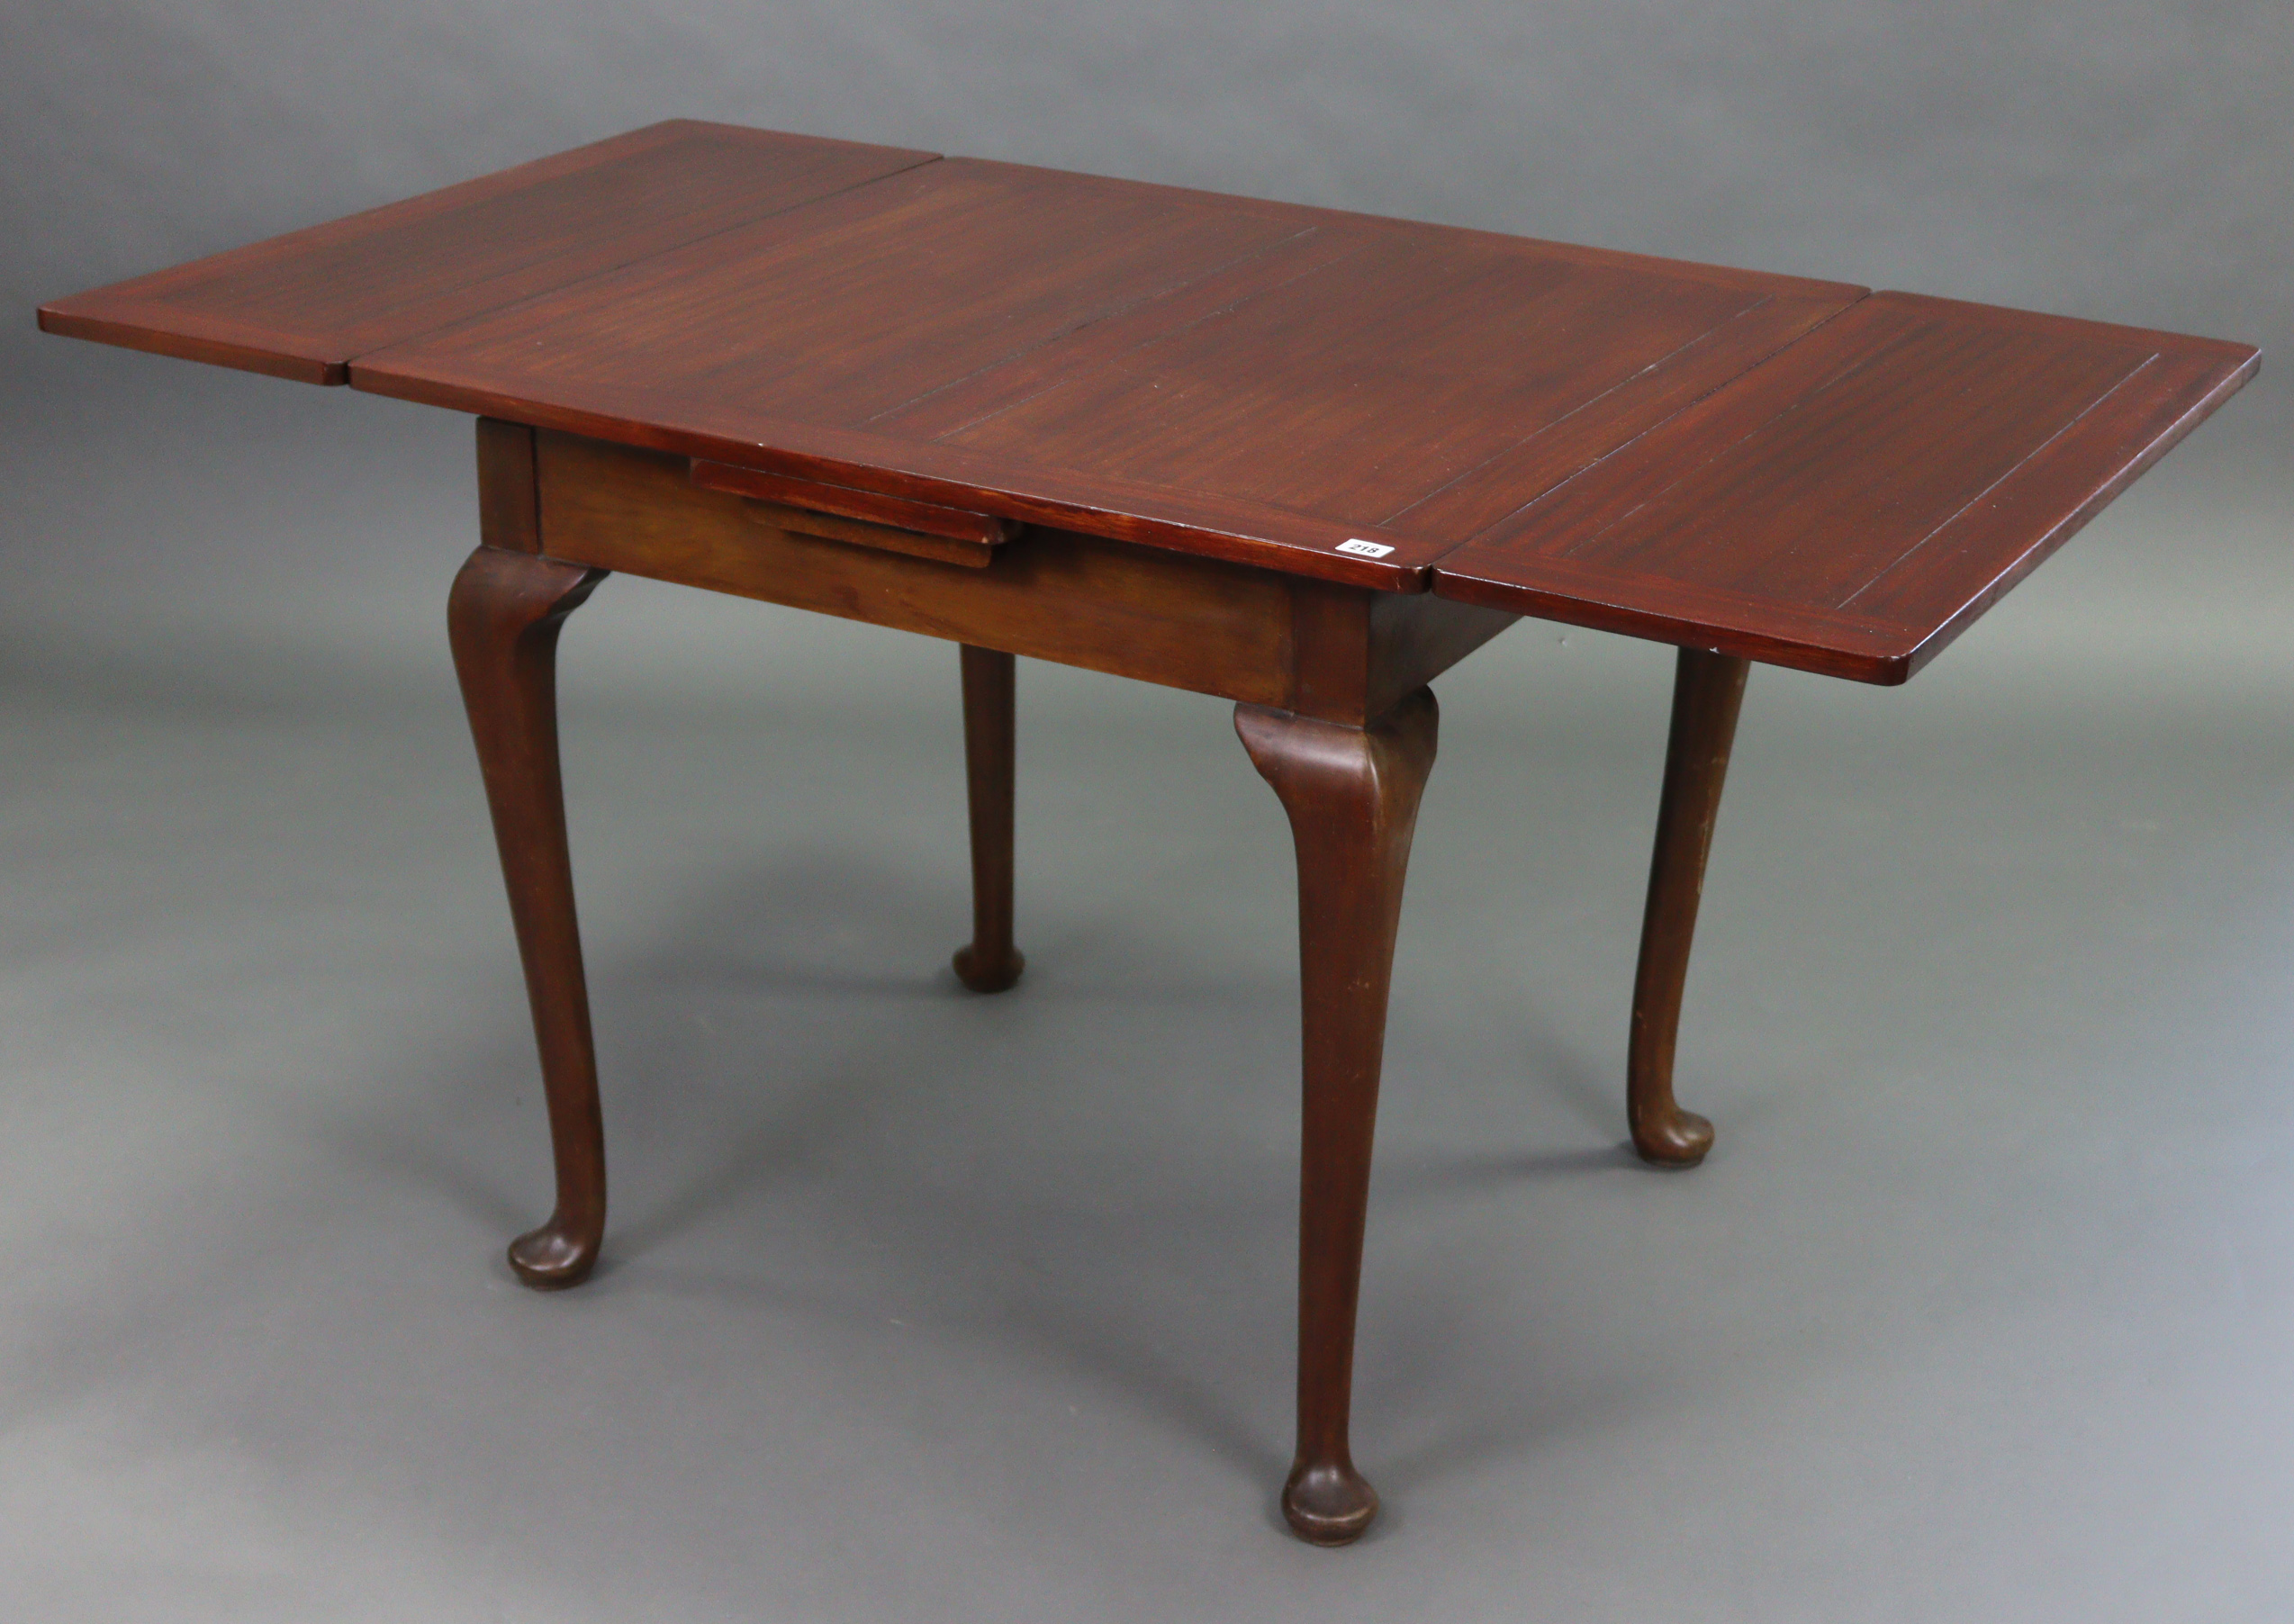 A mahogany draw-leaf dining table on four slender cabriole legs & pad feet, 32” x 57” (open), & a - Image 4 of 6